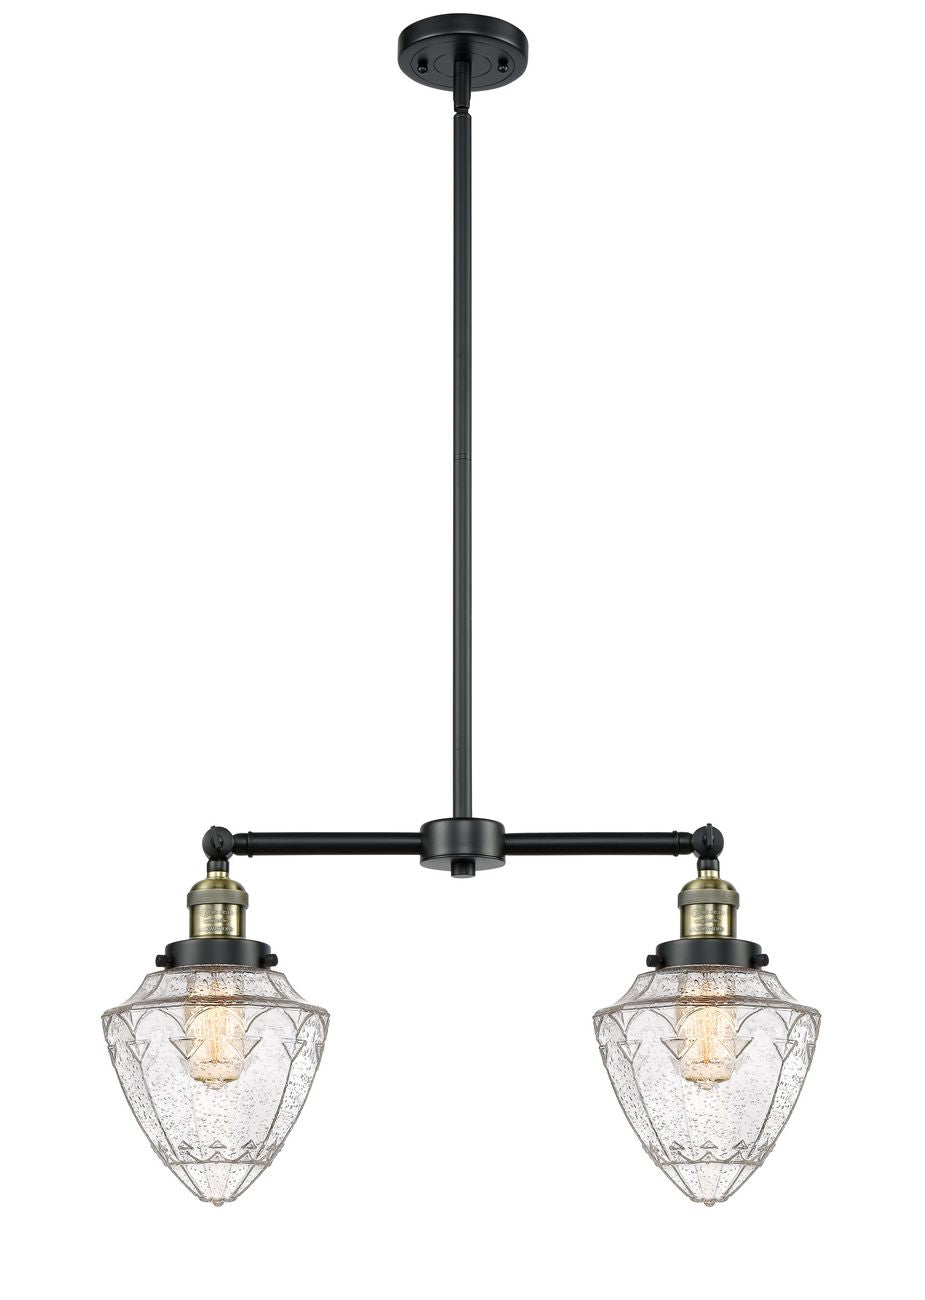 209-BAB-G664-7 2-Light 24" Black Antique Brass Island Light - Seedy Small Bullet Glass - LED Bulb - Dimmensions: 24 x 7 x 15.25<br>Minimum Height : 24.25<br>Maximum Height : 48.25 - Sloped Ceiling Compatible: Yes